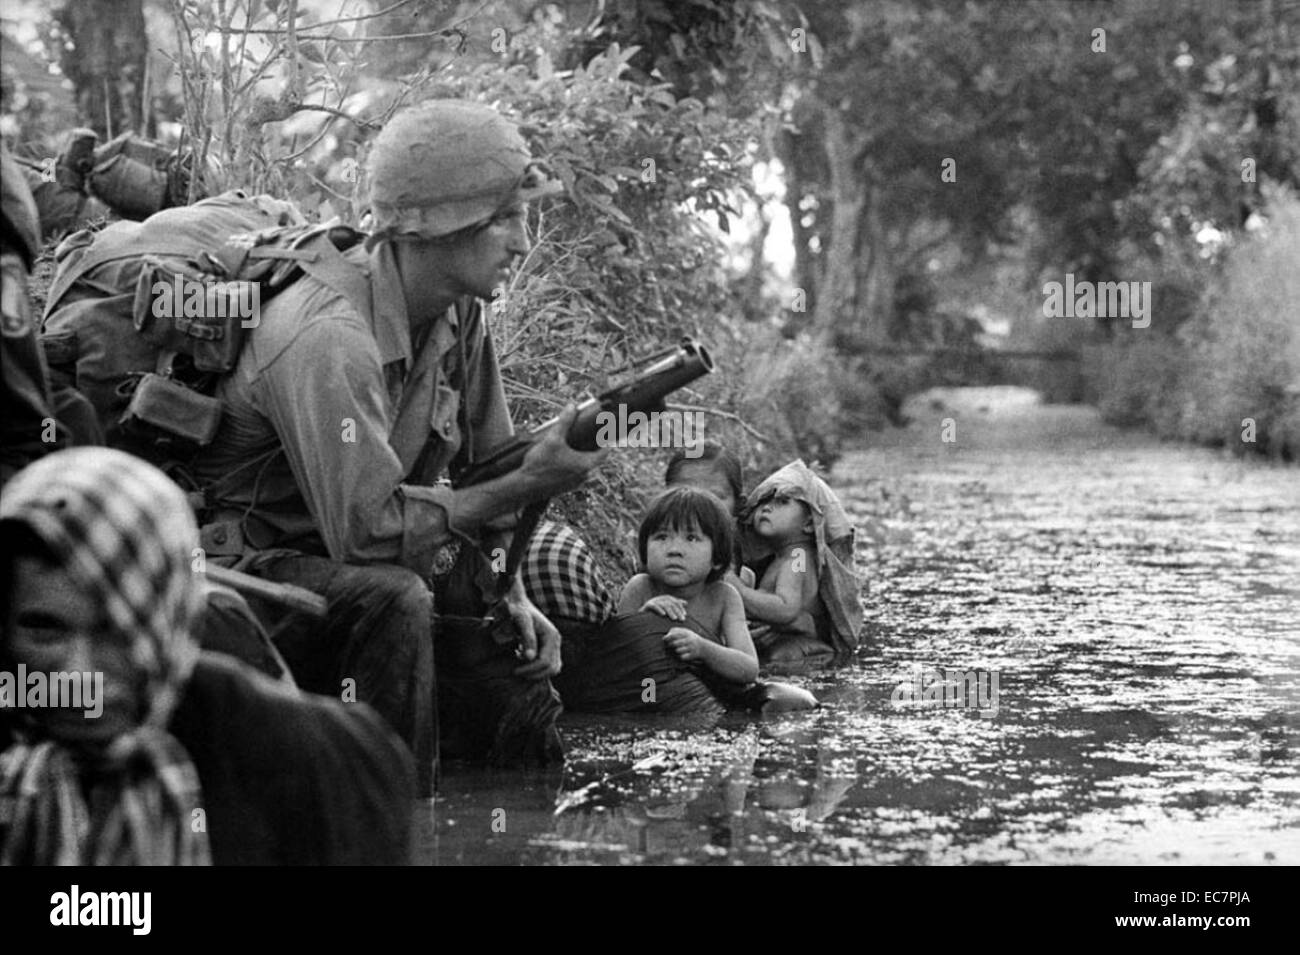 Photograph of two South Vietnamese children gazing at an American paratrooper holding an M79 grenade launcher as they cling to their mothers who huddle against a canal bank for protection from sniper fire in the Bao Trai area, Vietnam, 1966 Stock Photo